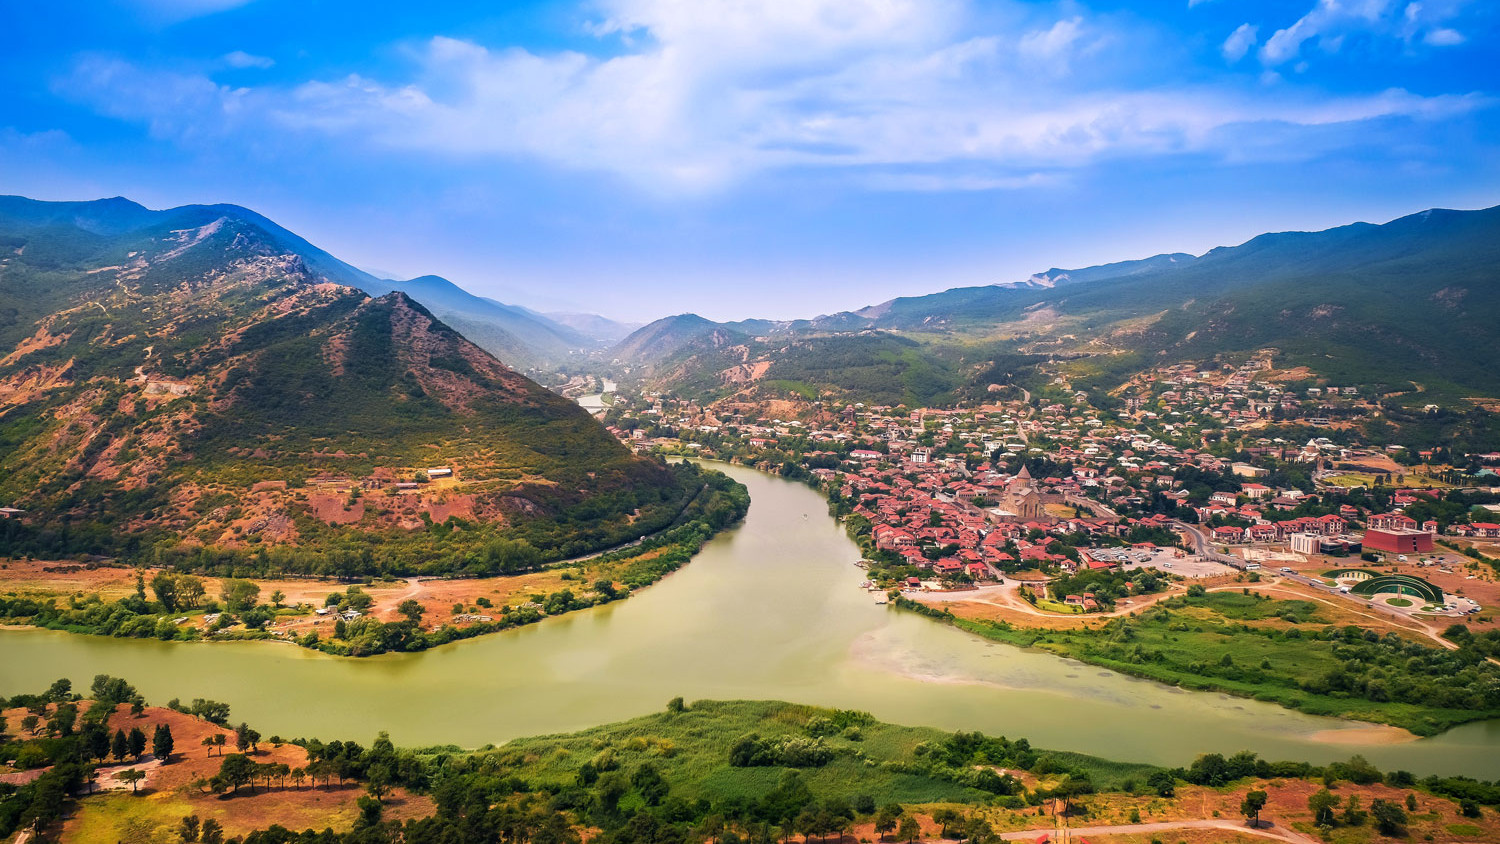 Panorama over the Armazi Mountains and the town of Mtskheta, confluence of two rivers Aragvi and Mtkvari